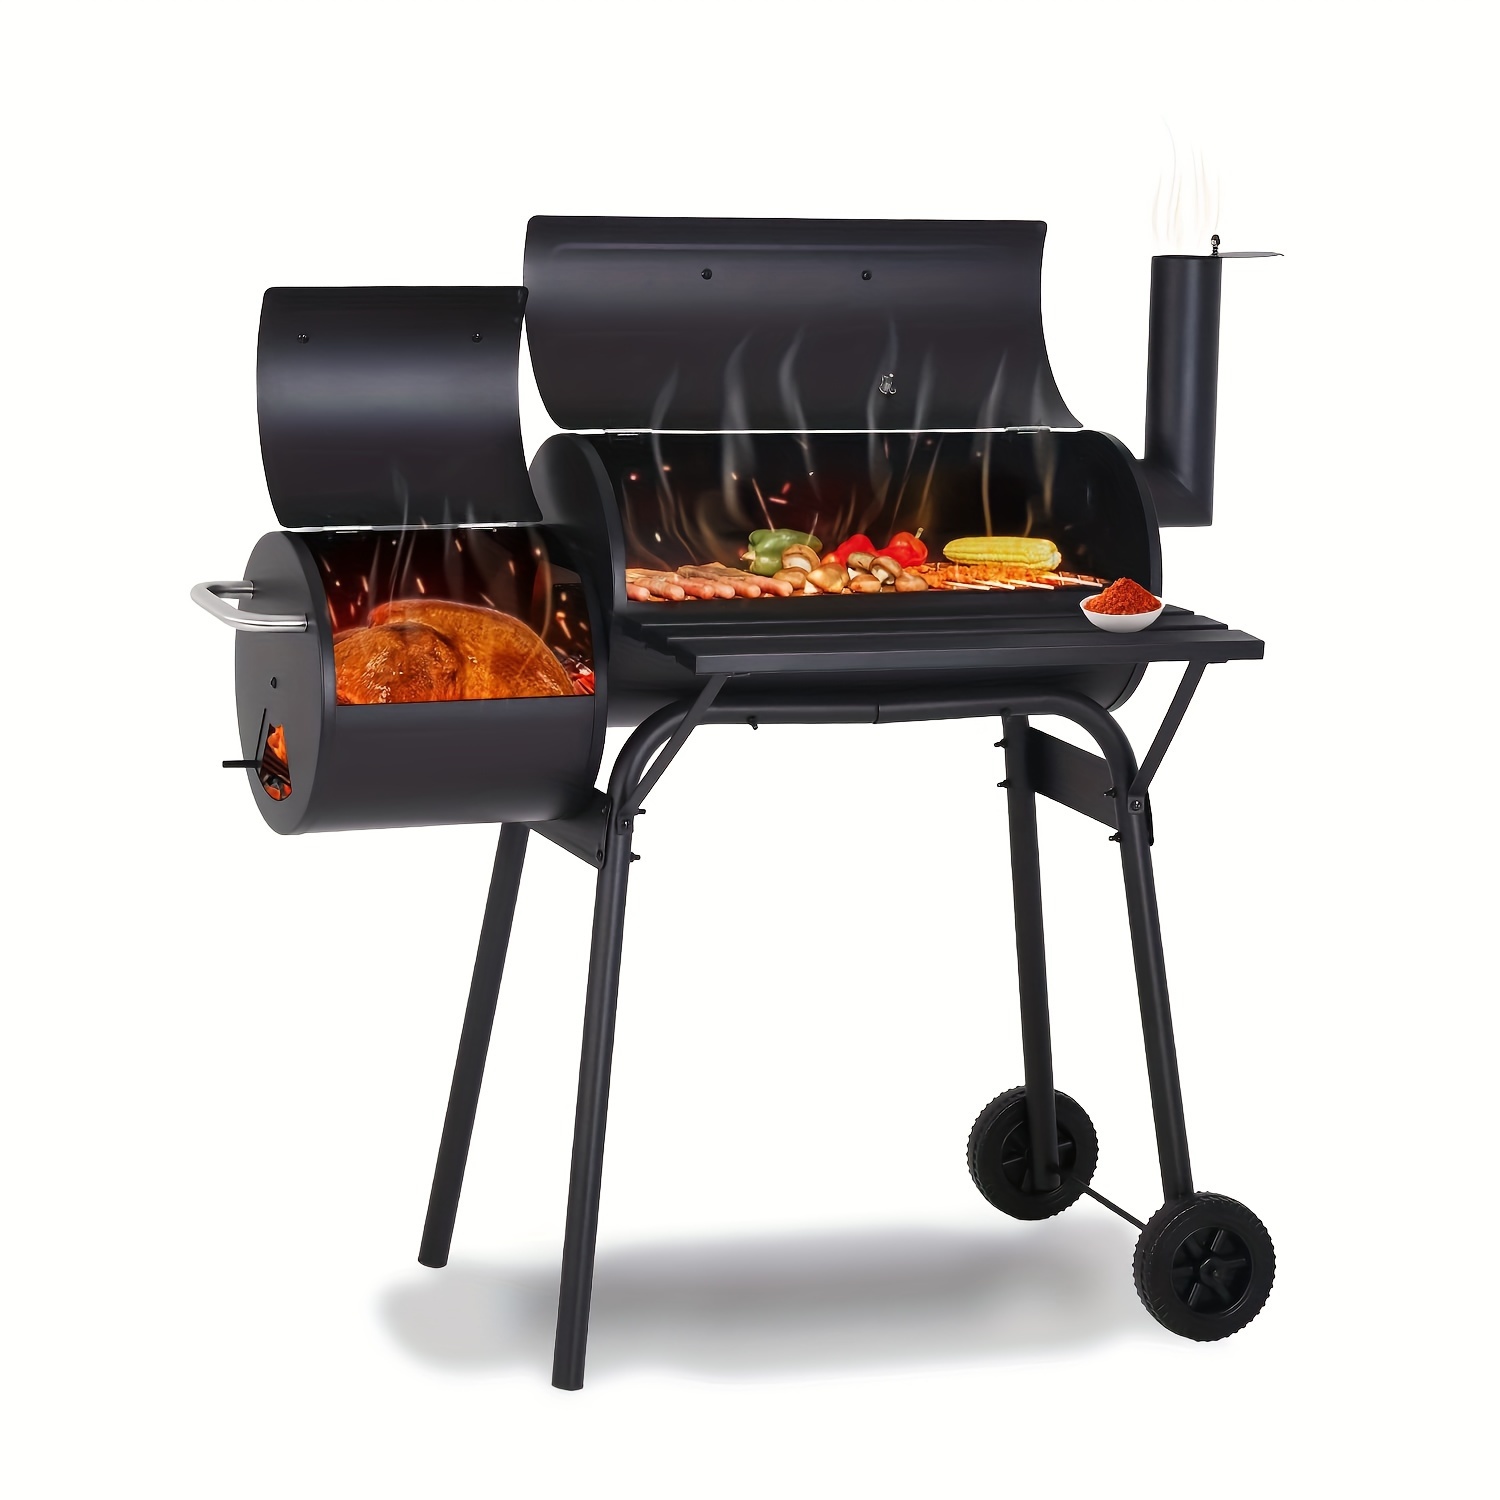 

Charcoal Grills Outdoor Barbecue Grill Offset Portable Bbq Grill With Wheels For Backyard Camping Picnics